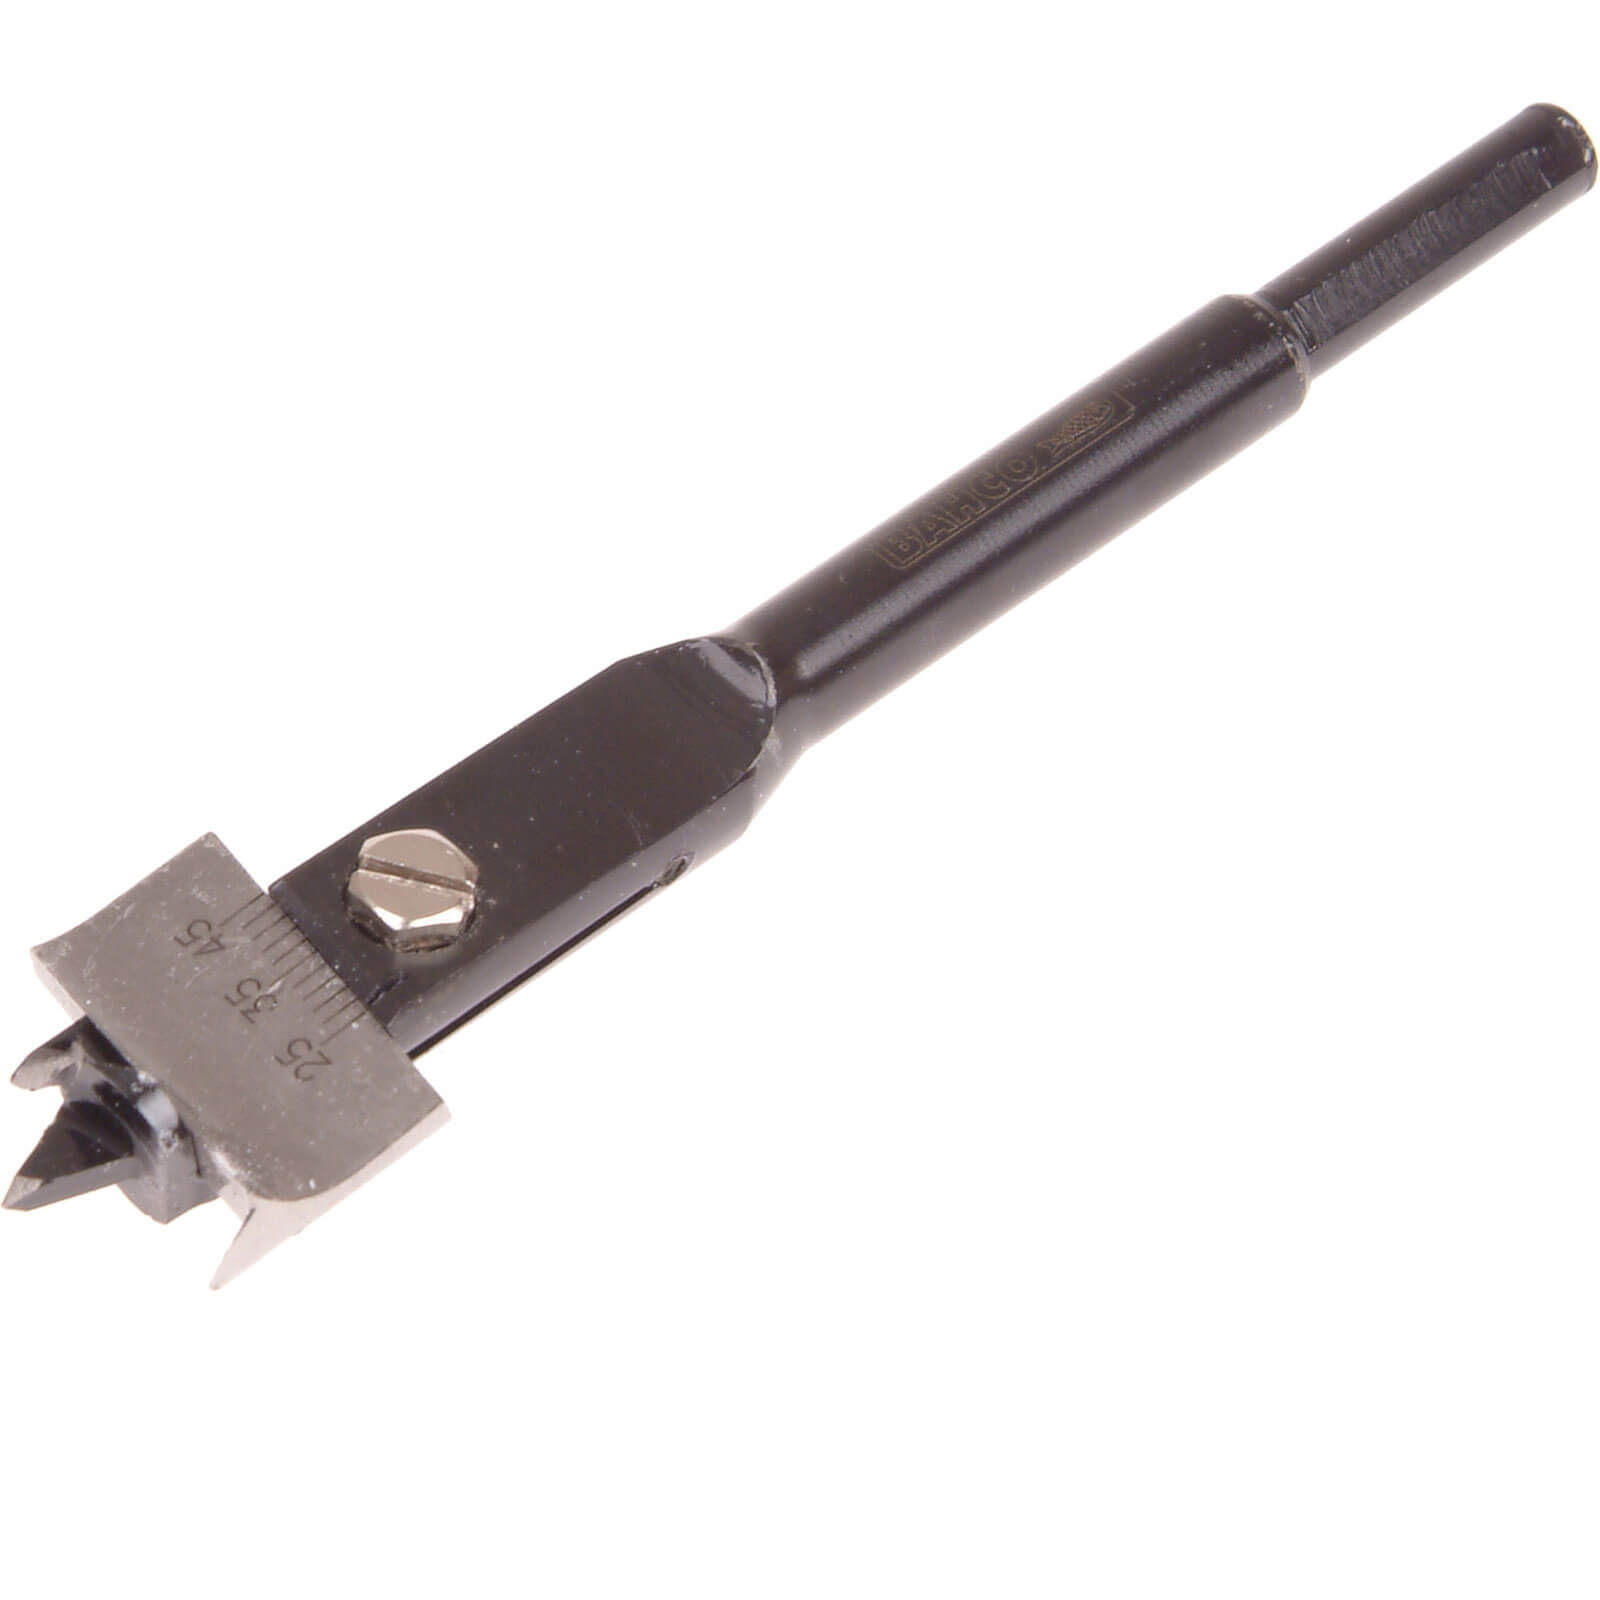 Image of Bahco Adjustable Expanding Flat Drill Bit 15mm - 45mm